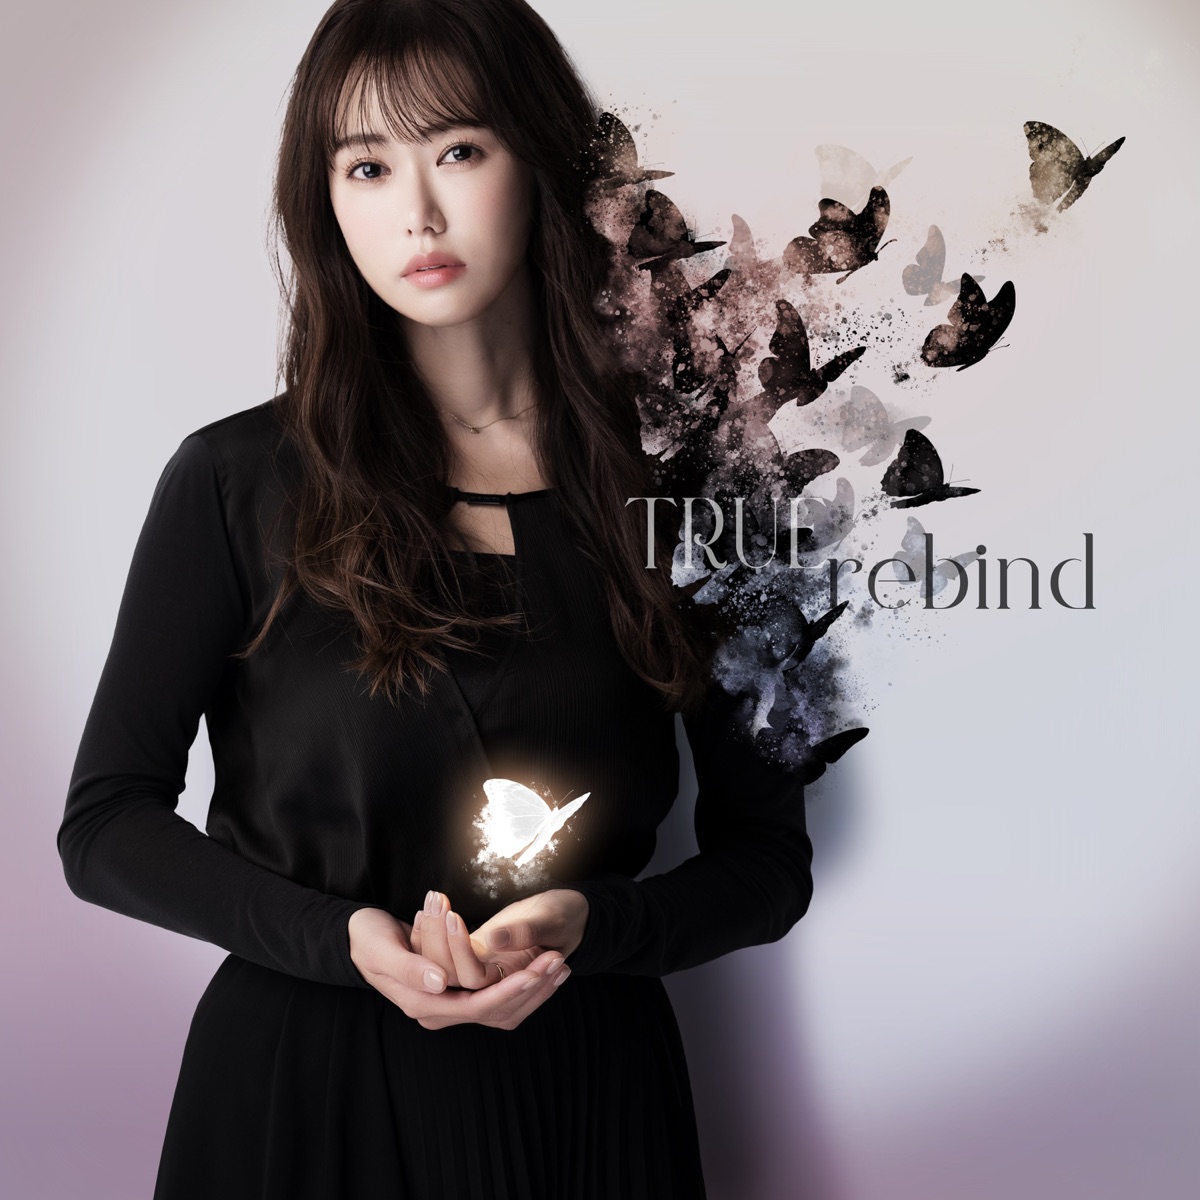 Cover art for『TRUE - DelighT』from the release『rebind』